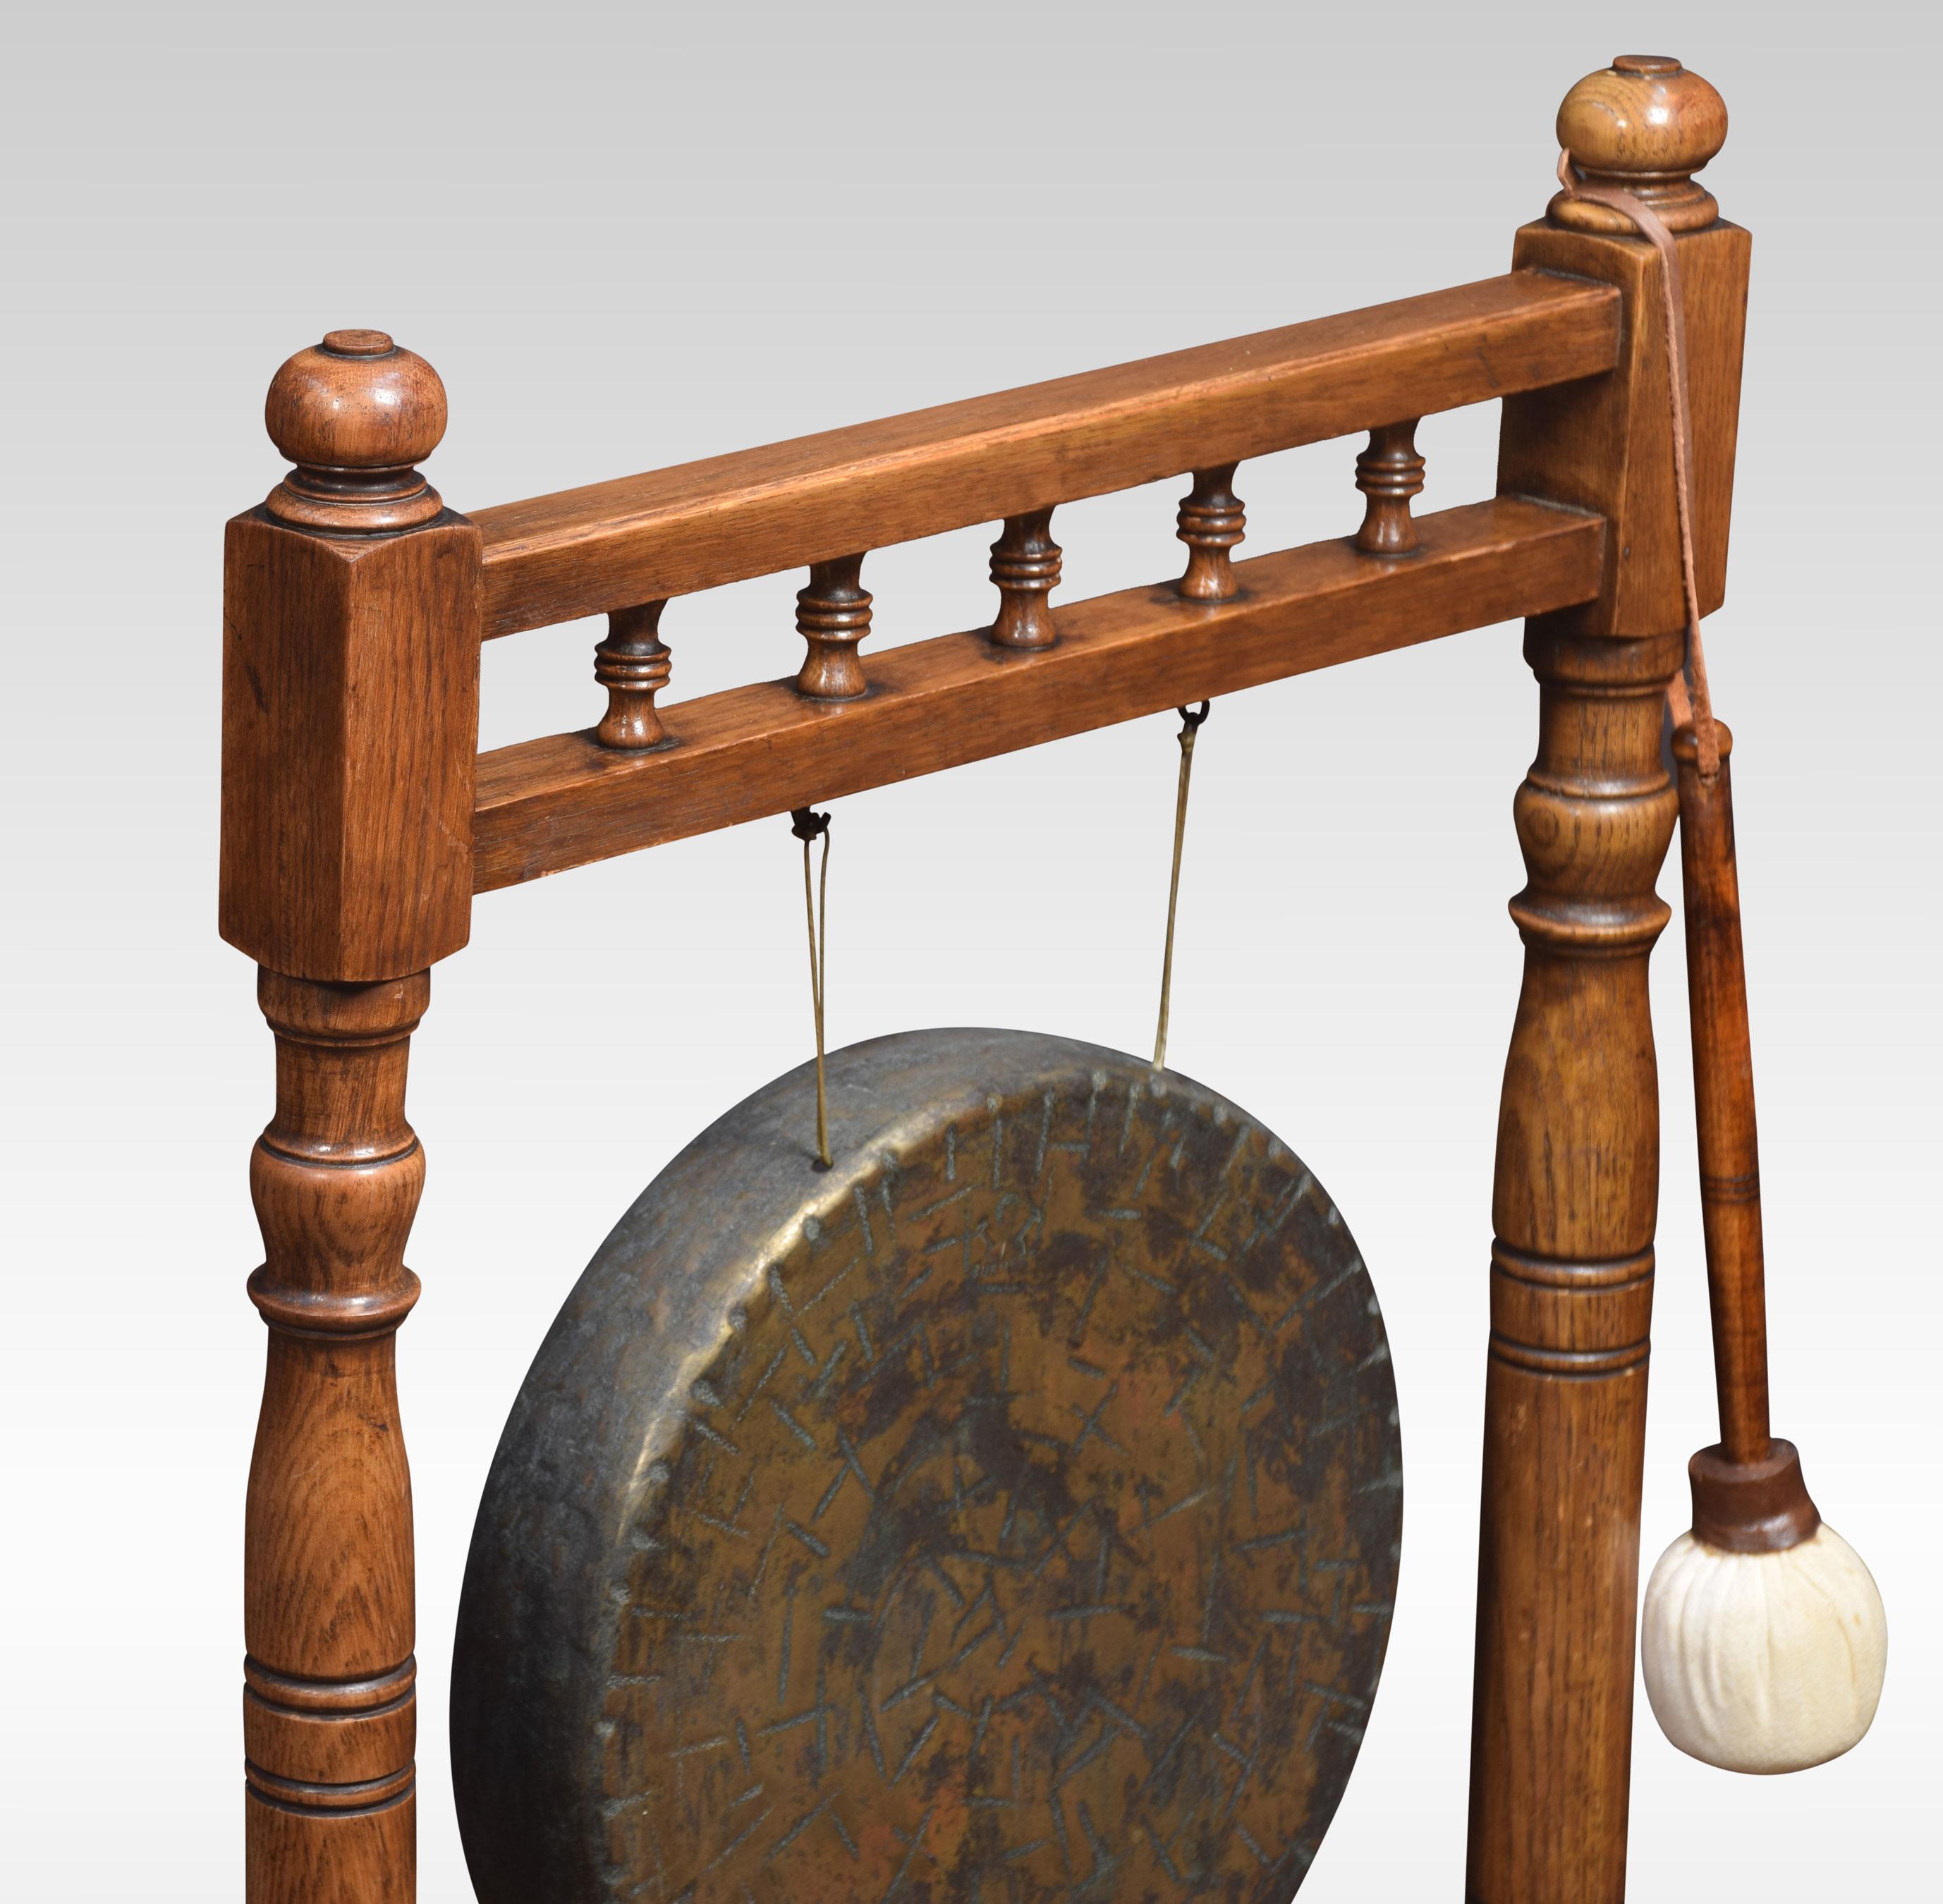 Oak framed brass dinner gong and beater, the stand having carved finials above two turned supports having suspended brass gong to centre raised up on platform base.
Dimensions:
Height 36 inches
Length 22 inches
width 13 inches.